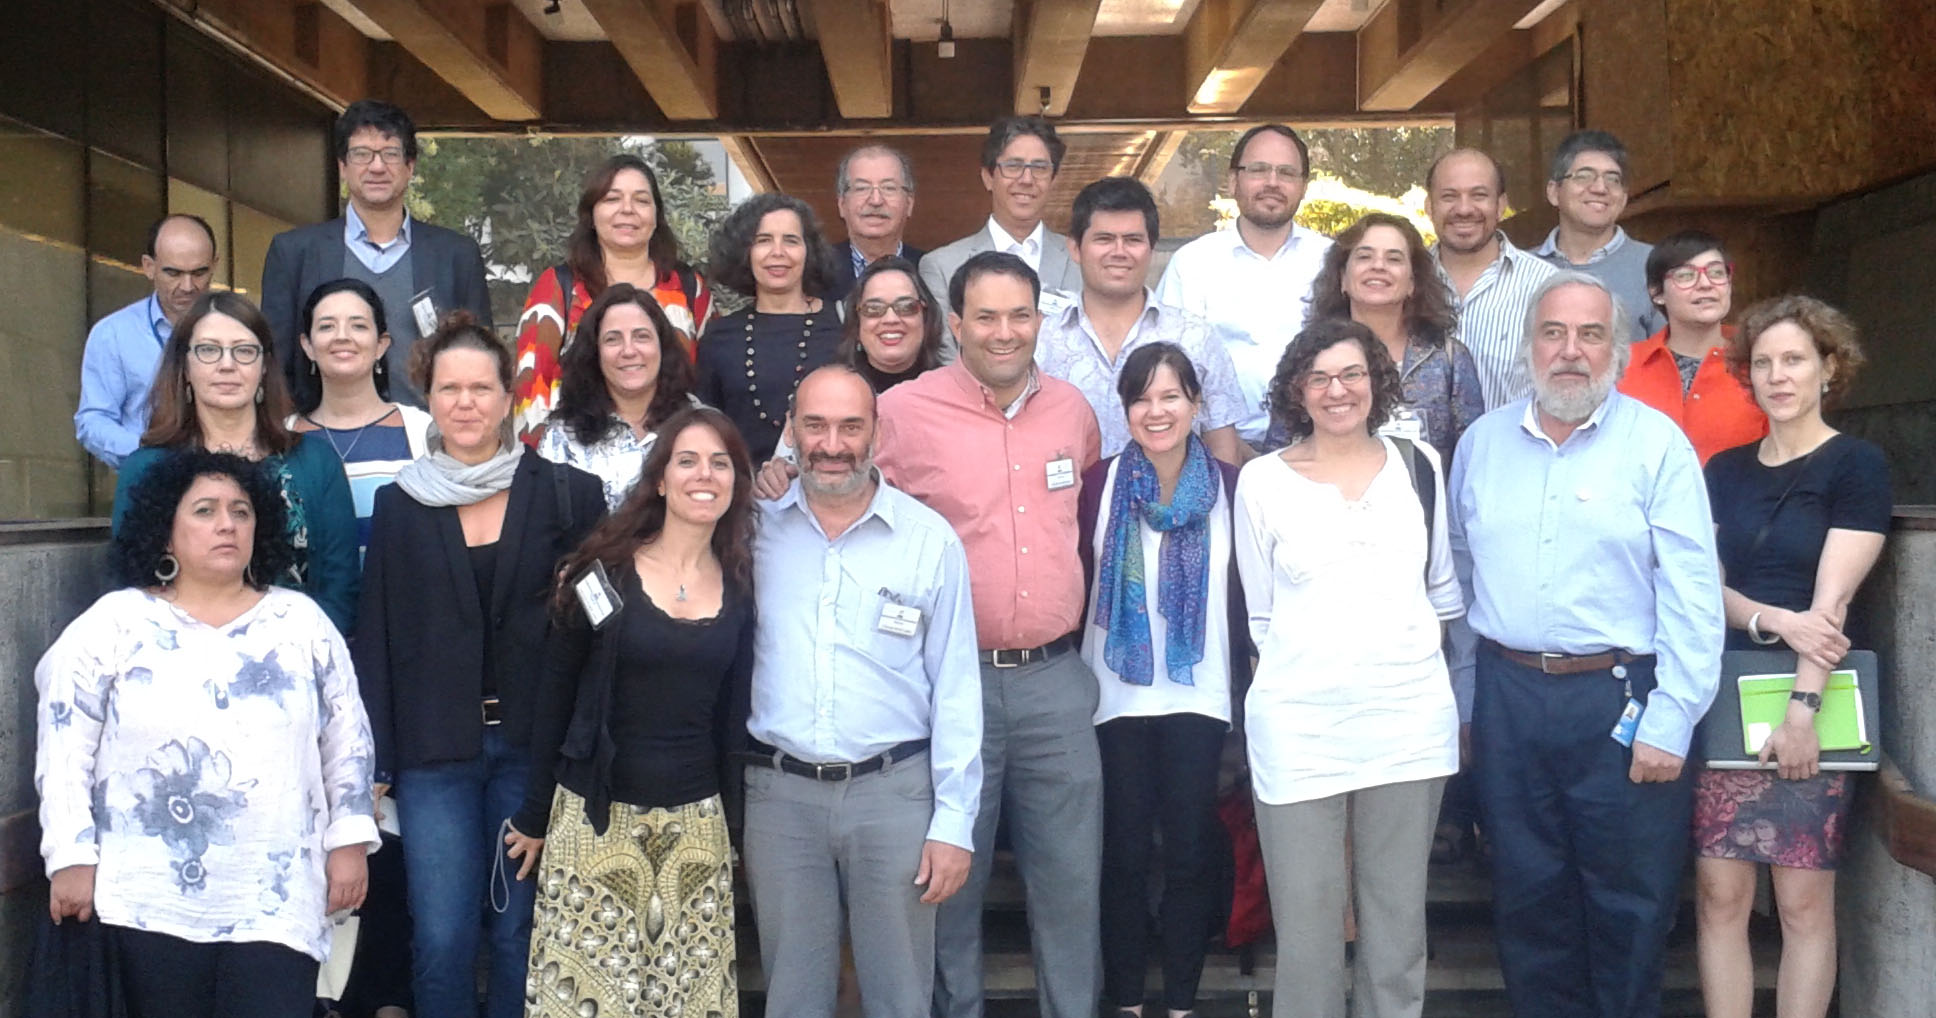  Network for Urban Health in Latin America and the Caribbean participants